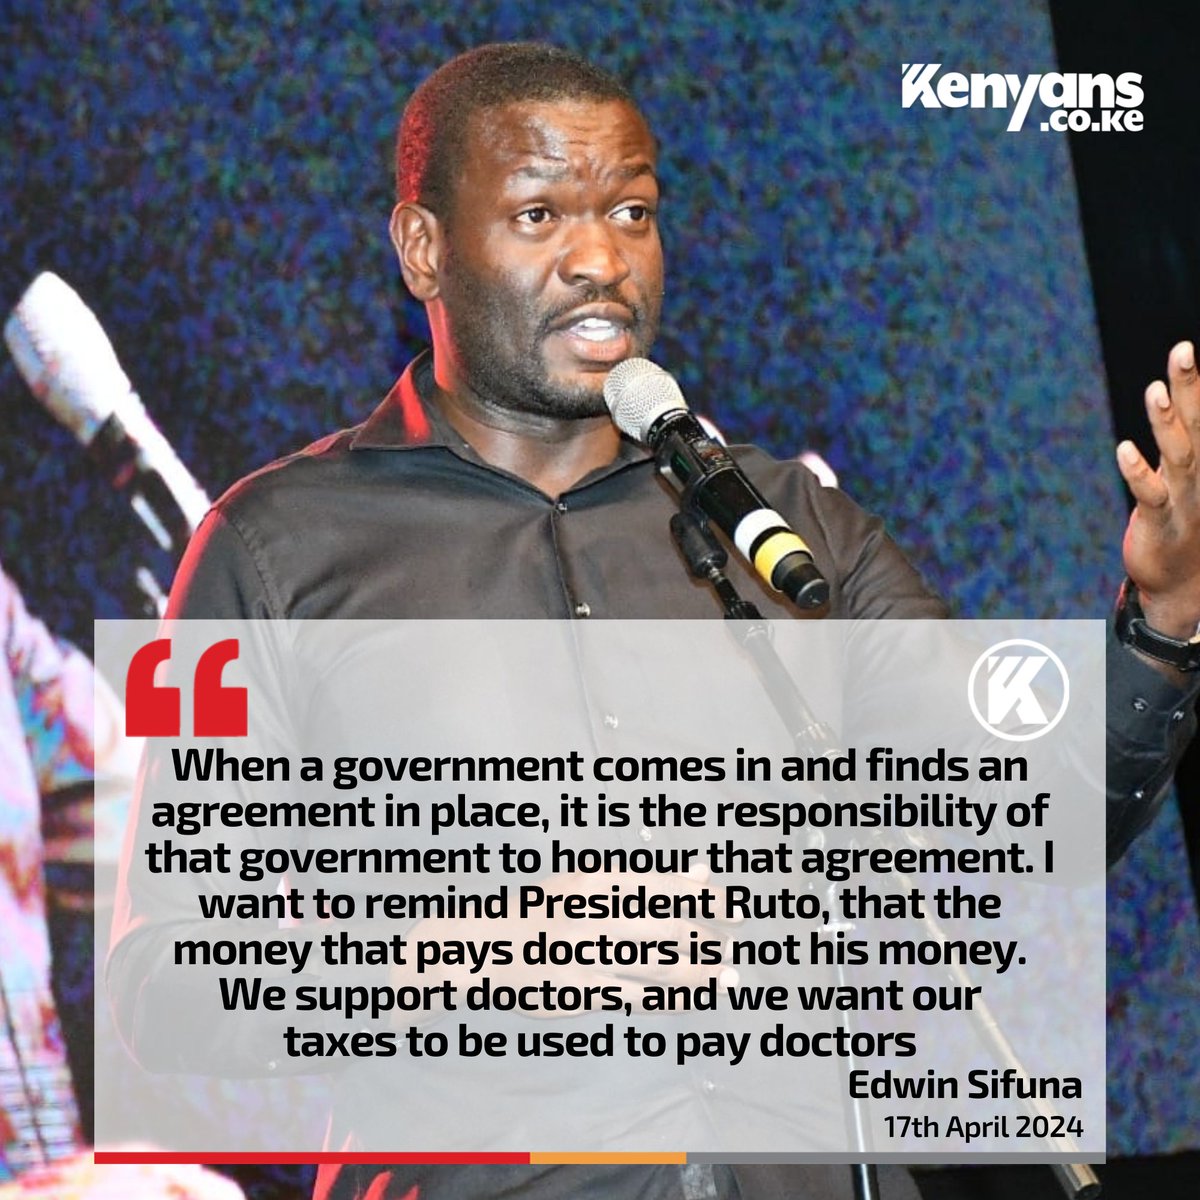 I want to remind President Ruto that the money that pays doctors is not his money - Edwin Sifuna